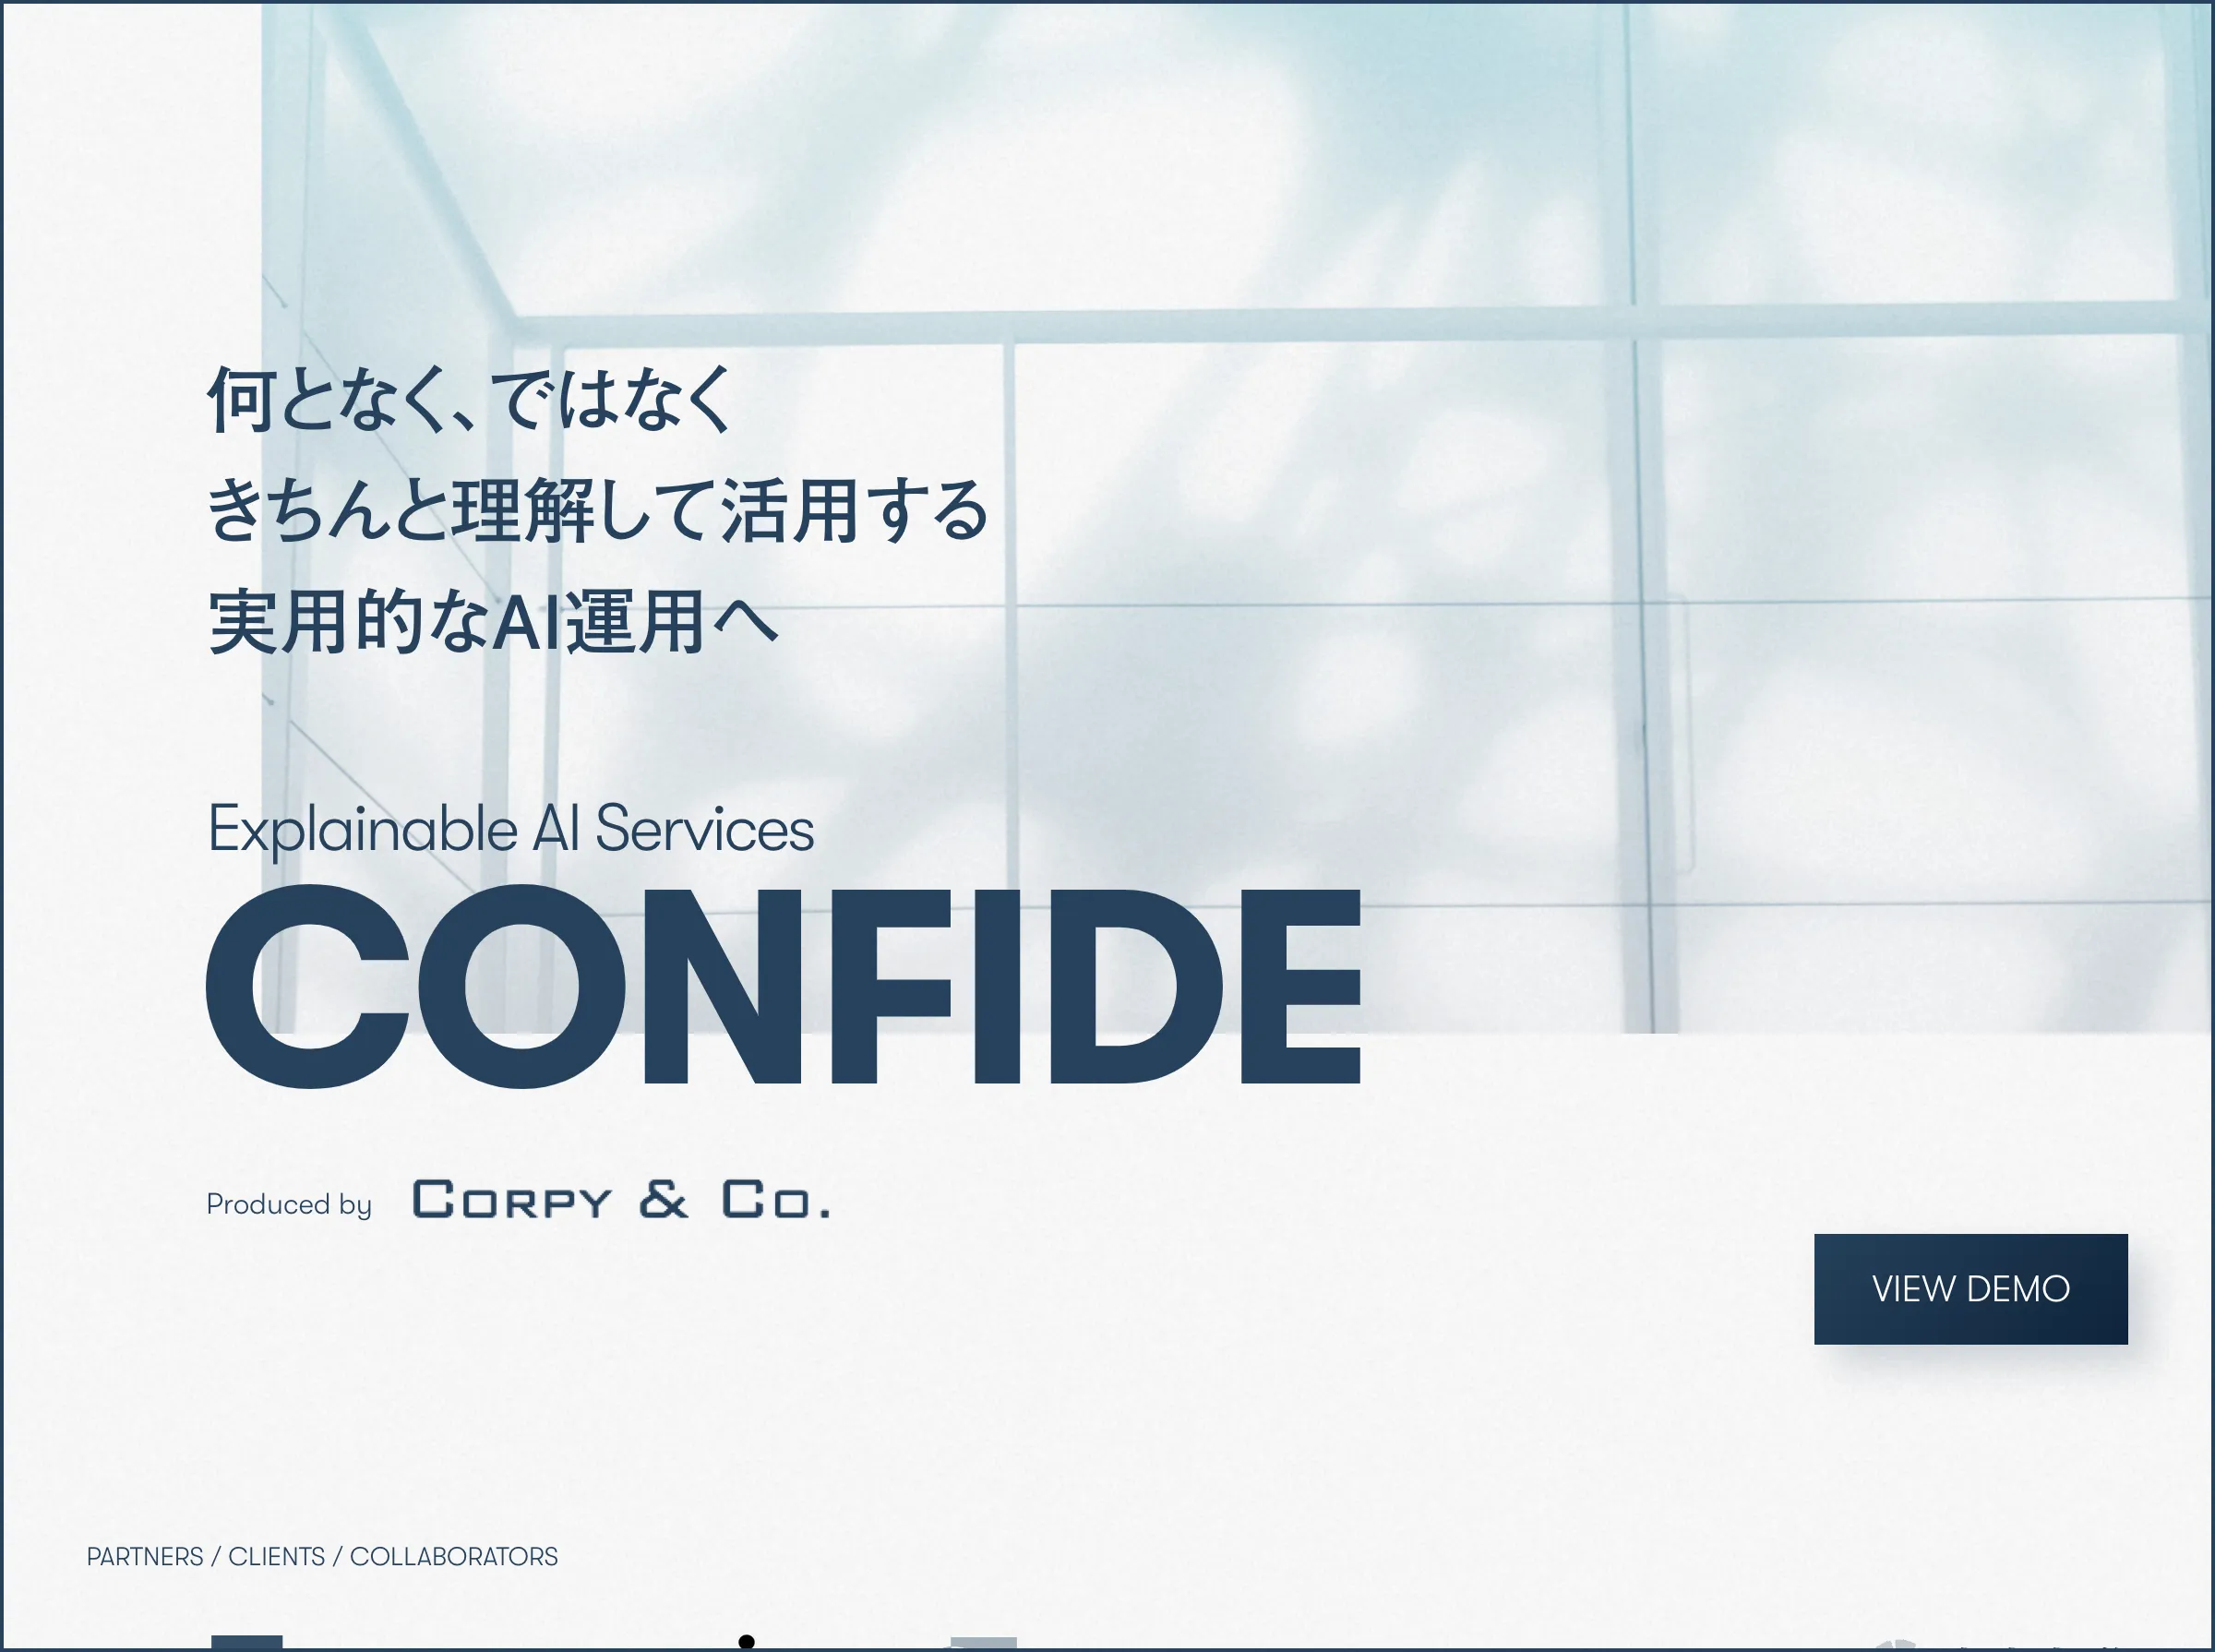 CONFIDE for Factoryの紹介画像